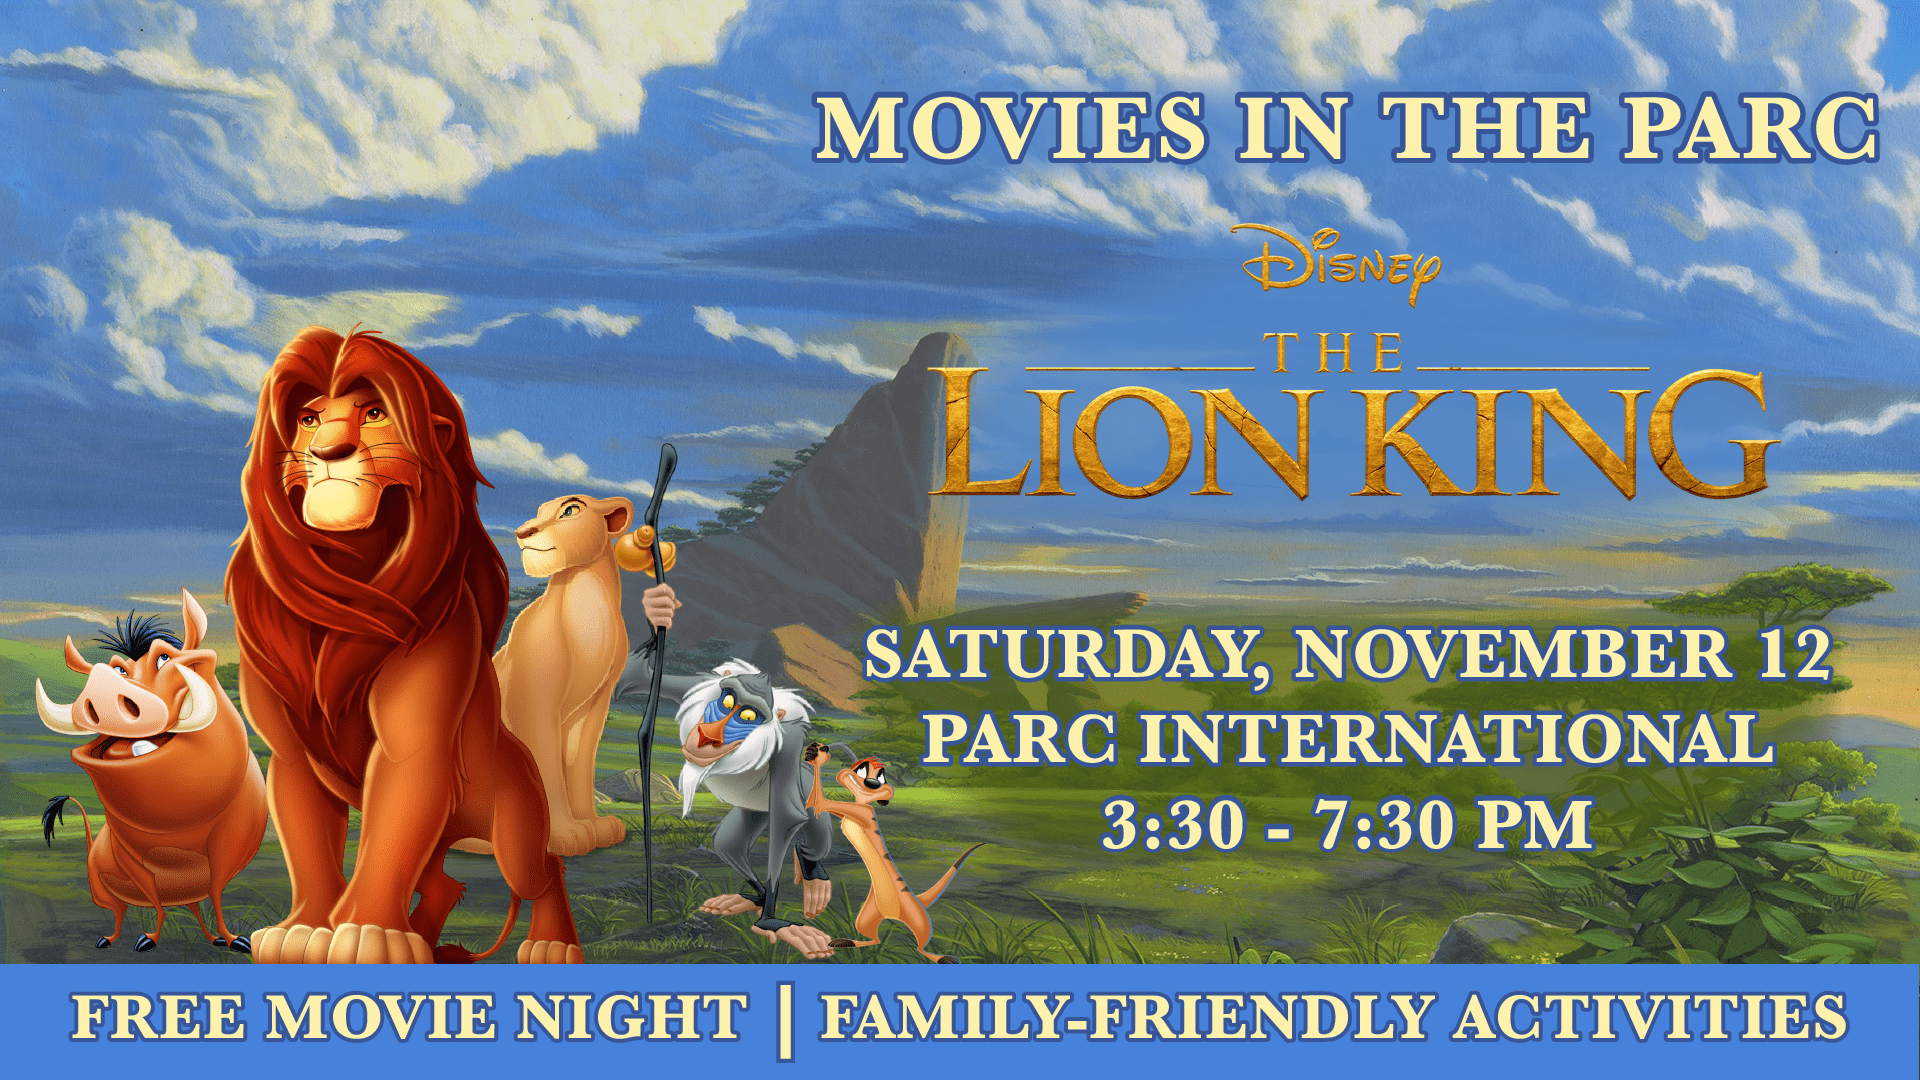 Movies in the Parc ft. Lion King - Downtown Lafayette Unlimited